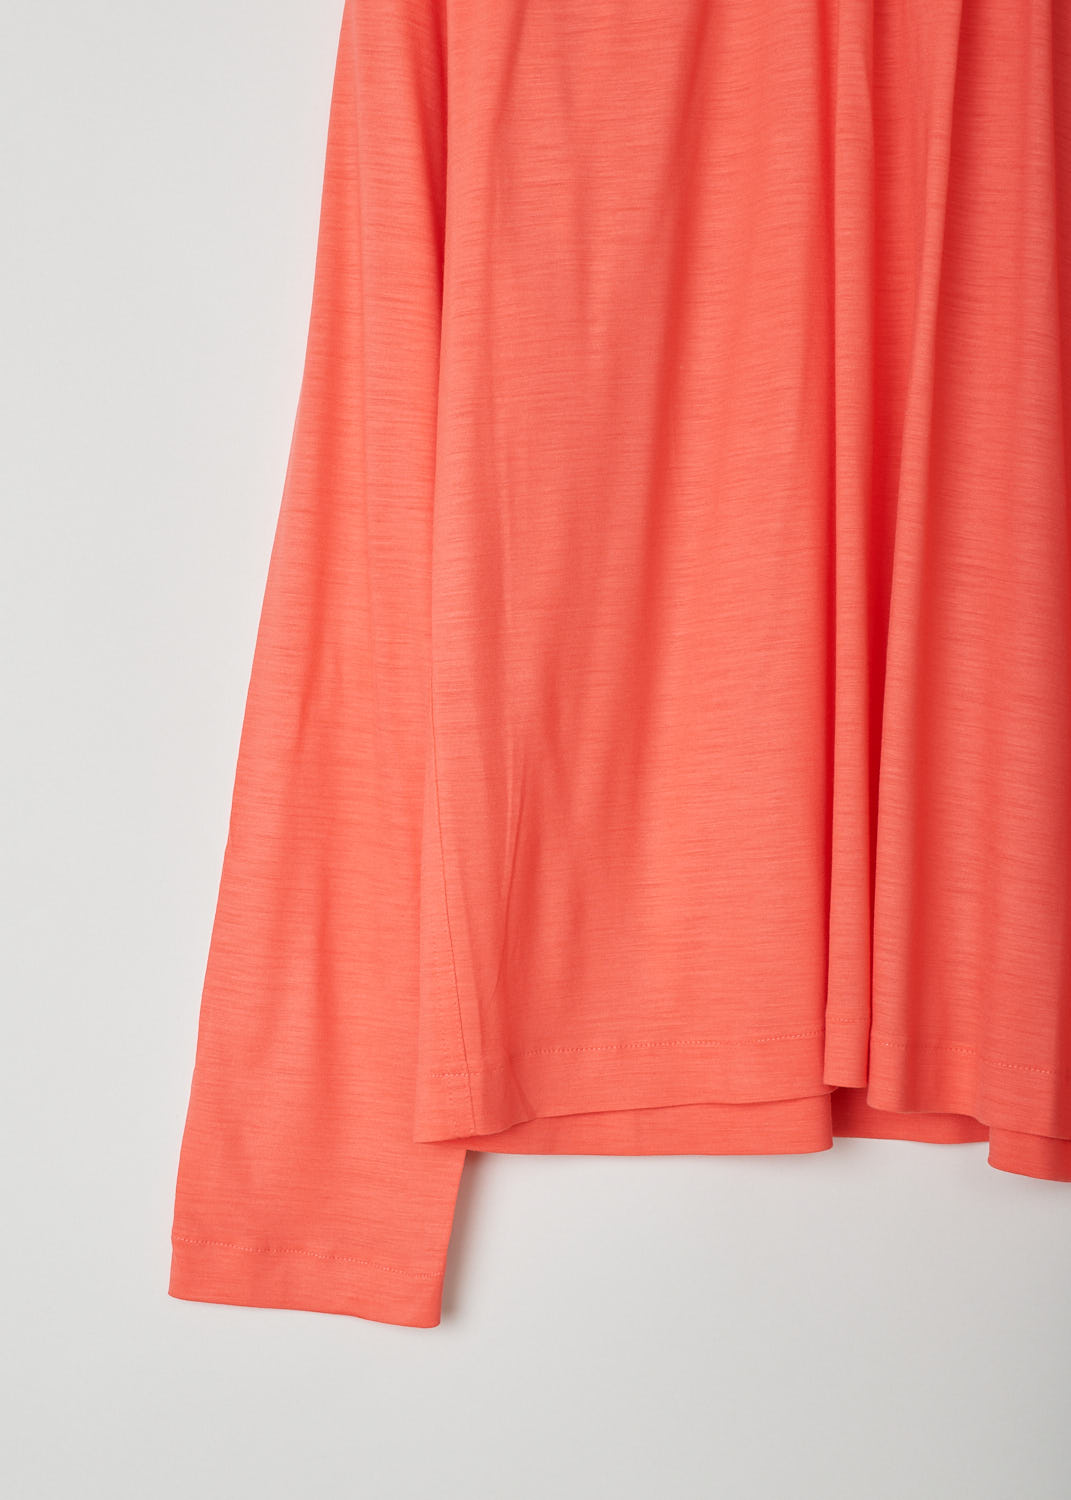 SOFIE Dâ€™HOORE, LONG SLEEVE CORAL TOP, BRIANNA_WOJE_CORAL, Pink, Orange, Detail, This coral colored top features a gathered elasticated neckline. The long sleeve top drapes the bodice, creating a relaxed fit. 
